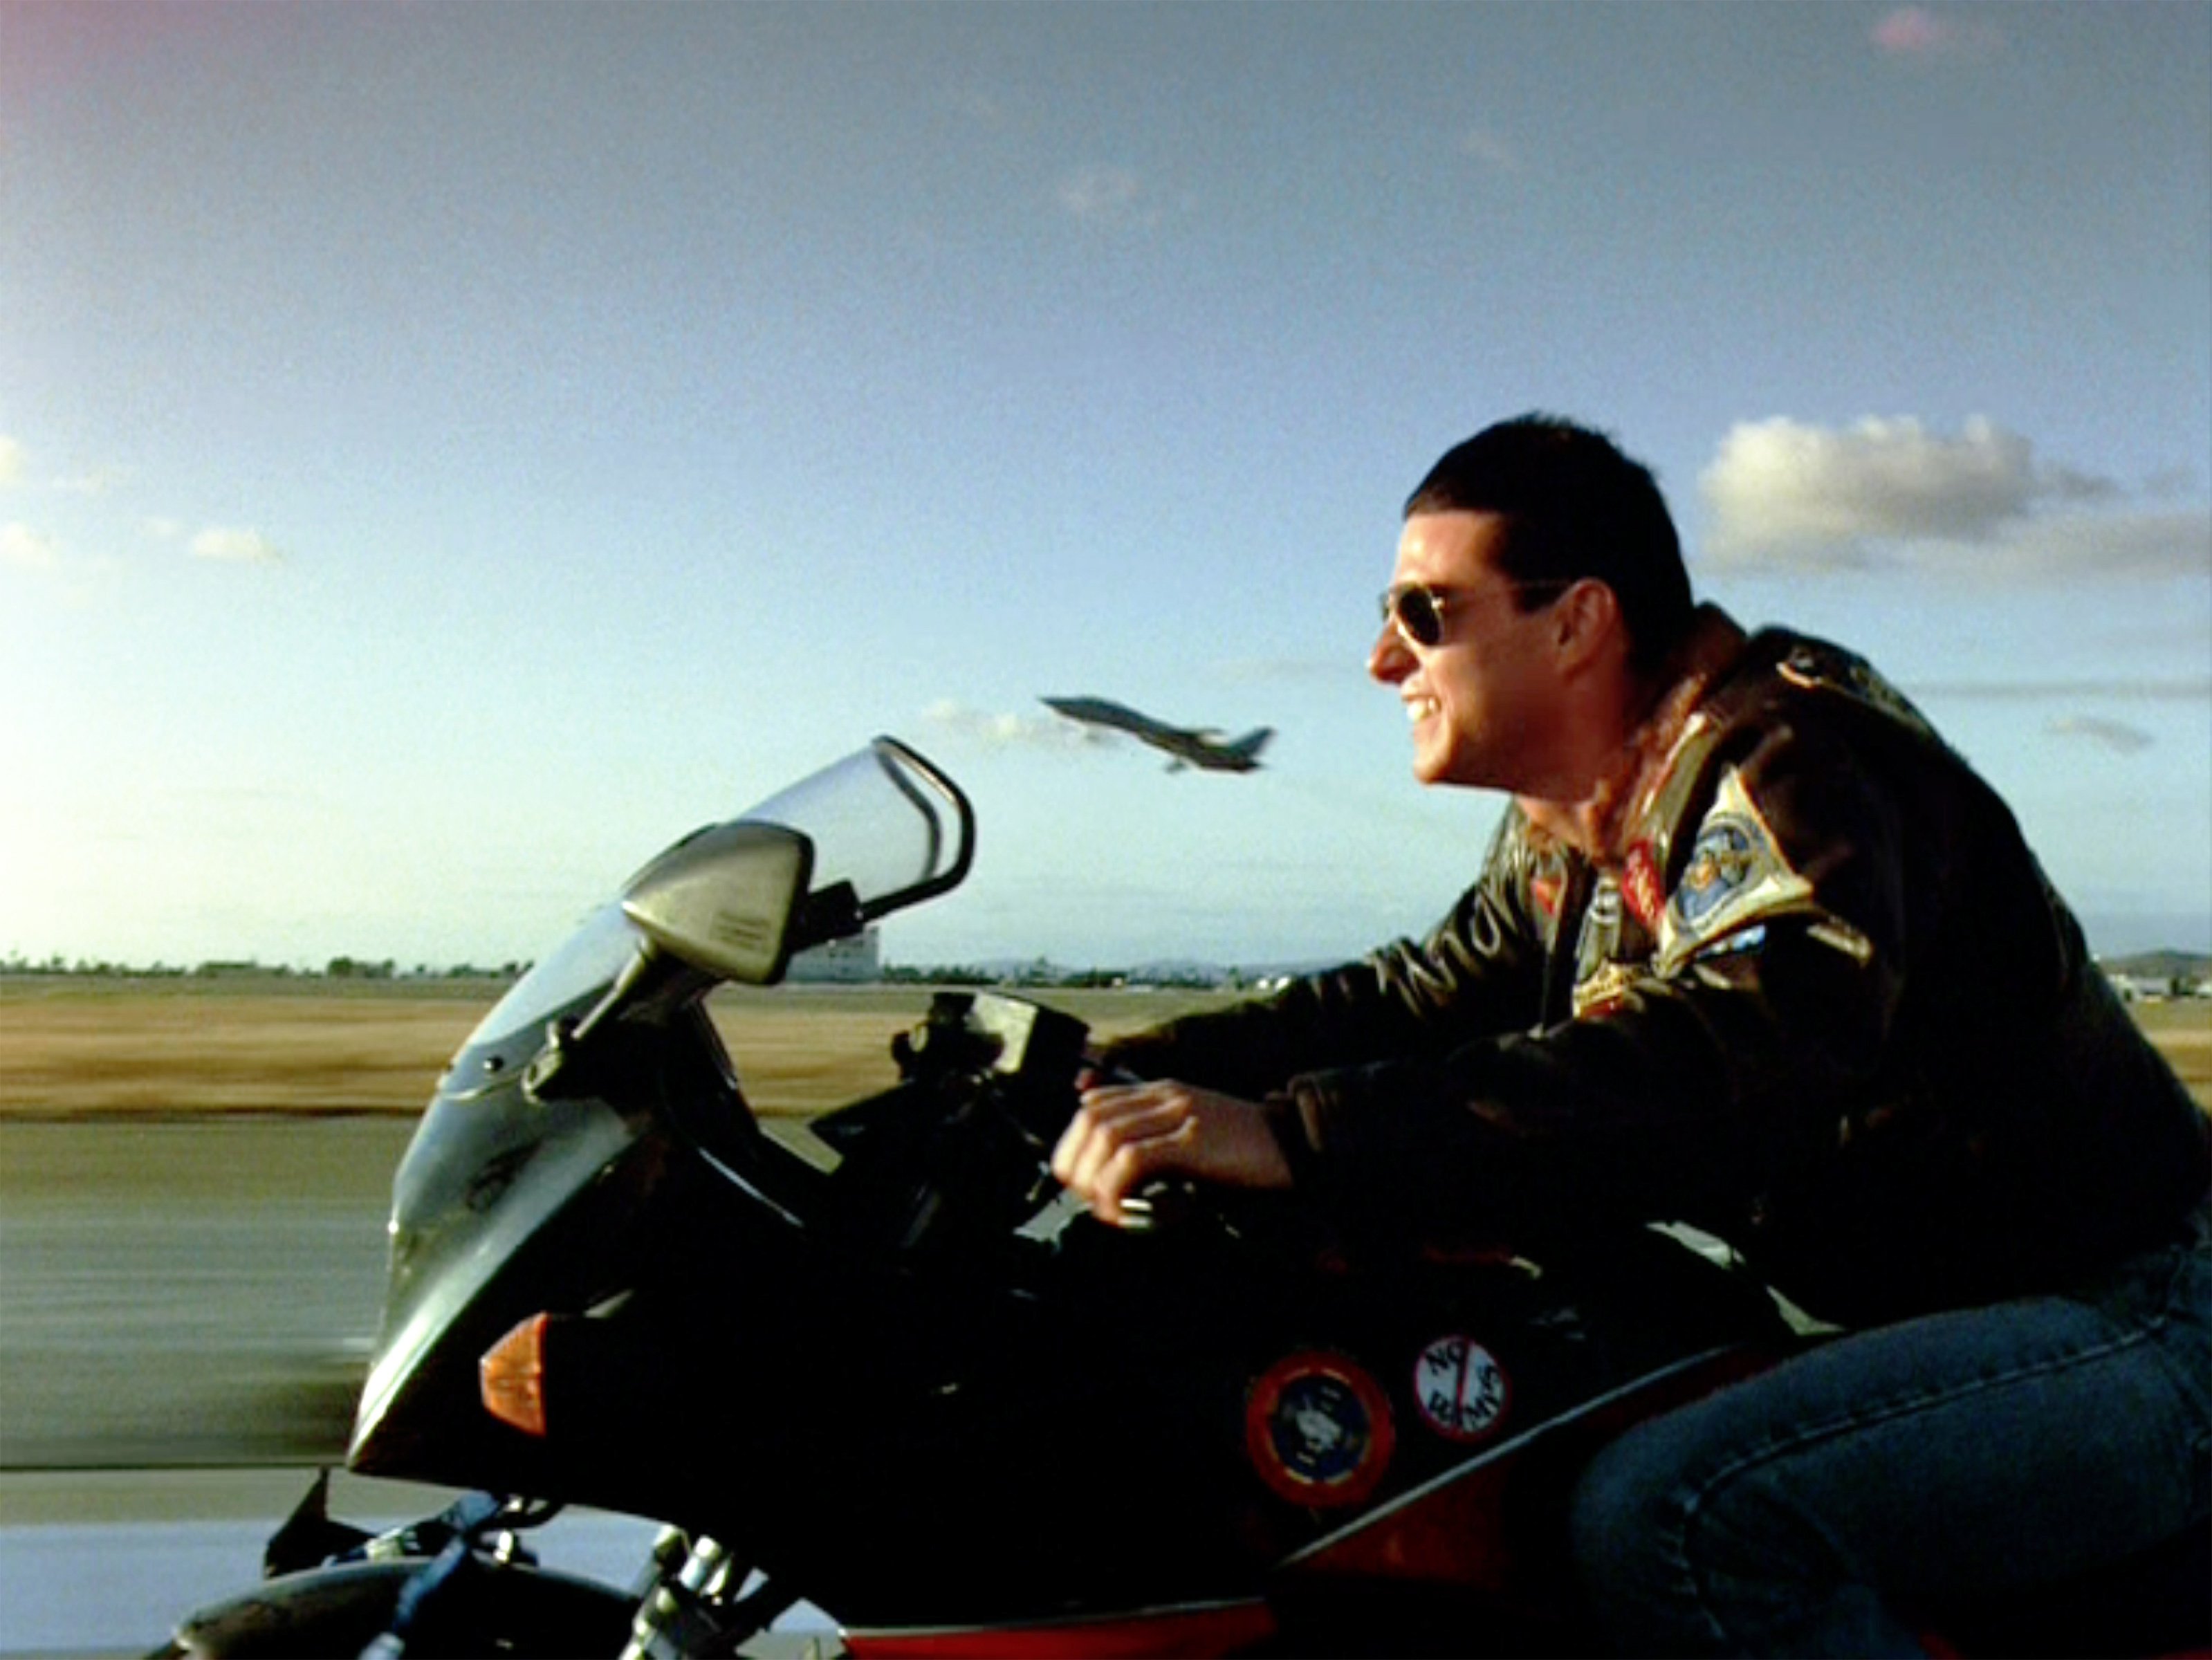 Tom Cruise appears as Maverick in Tony Scott's Top Gun, which includes the iconic beach volleyball scene